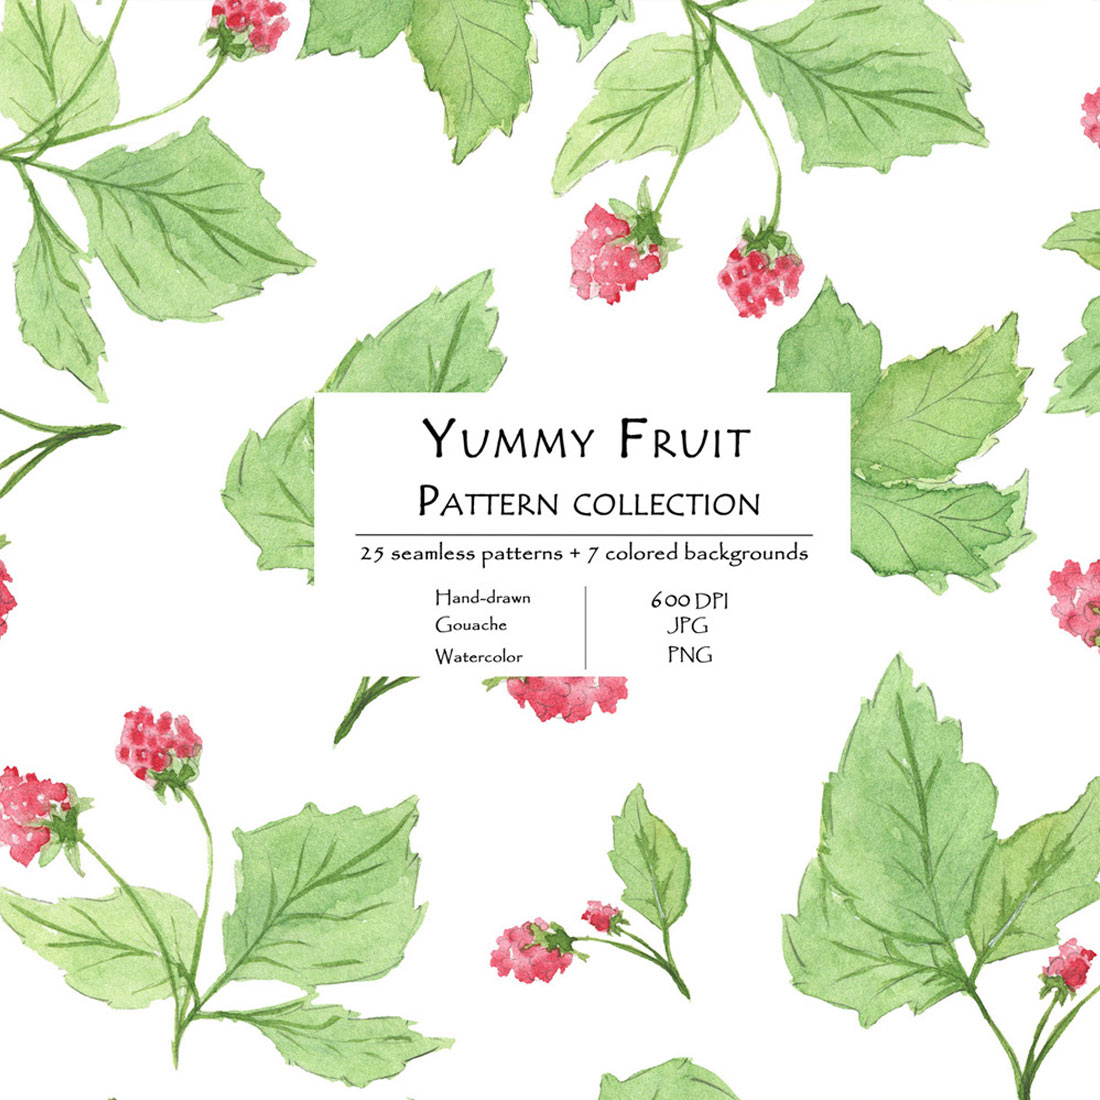 Yummy Fruit Pattern Collection With 25 Seamless Patterns And 7 Backgrounds Preview Image.